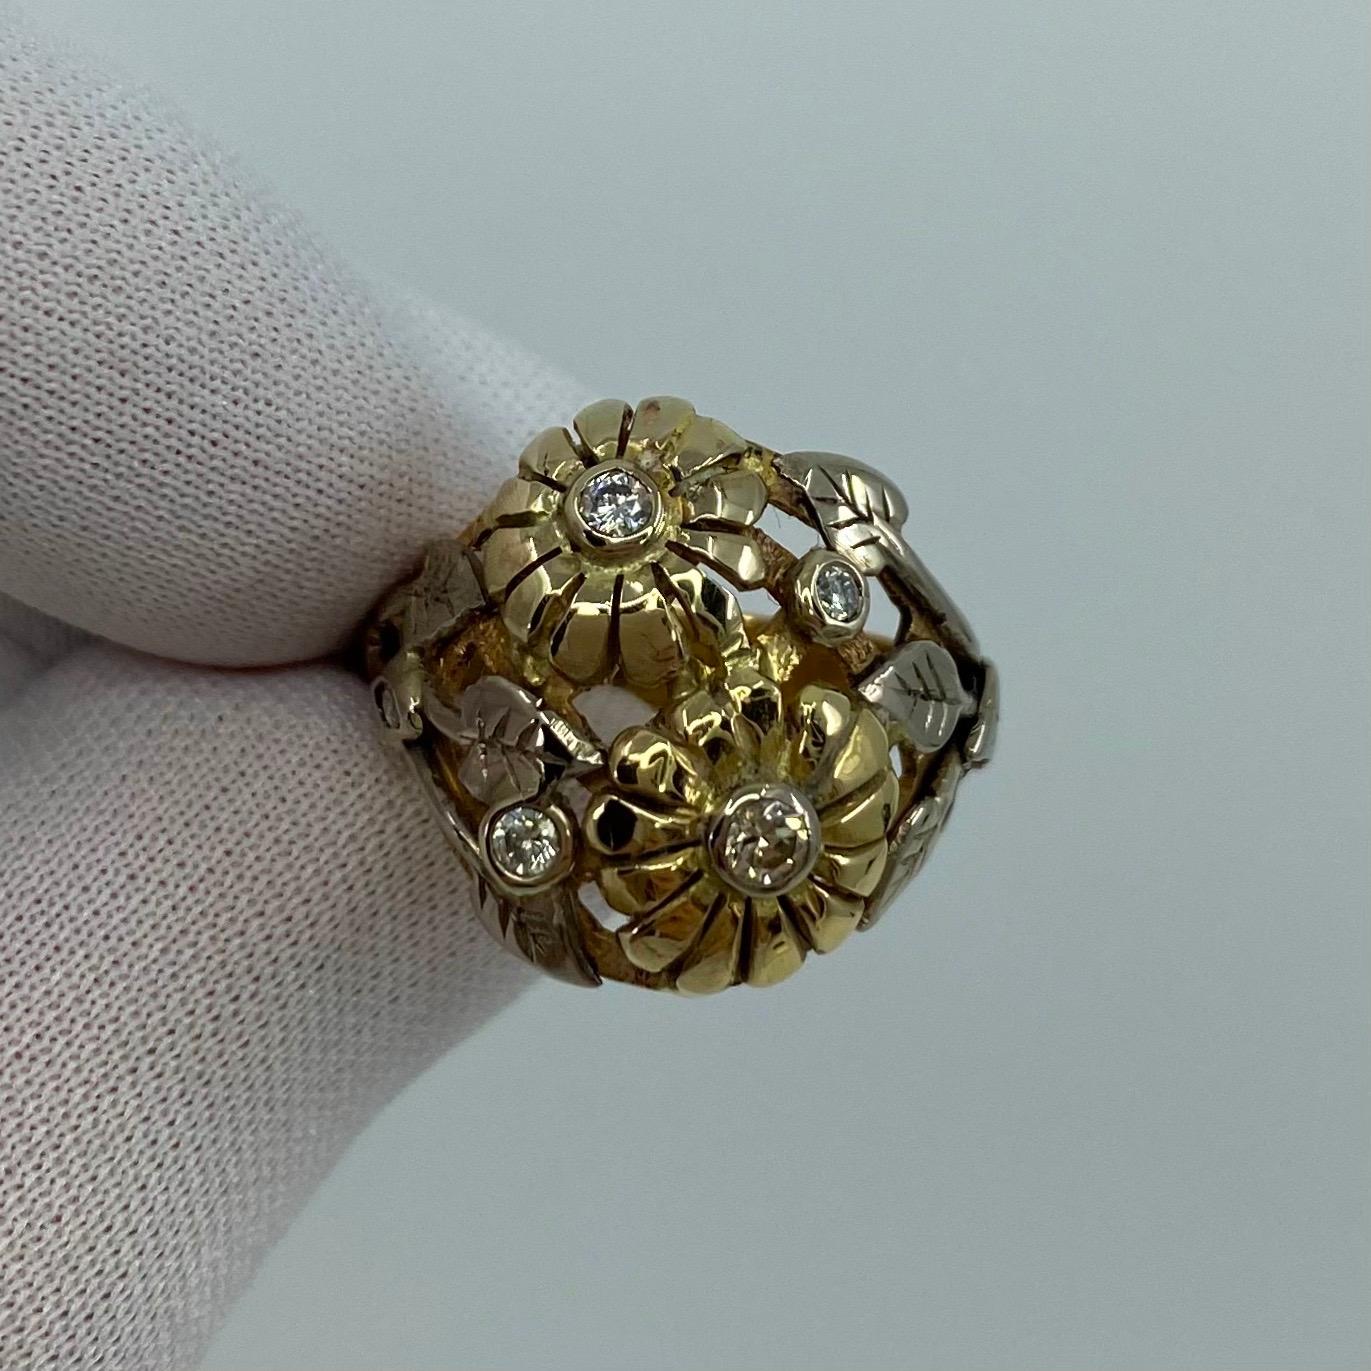 Handmade Summertime Flower 18 Karat Gold Art Nouveau Style Ring.

This is a beautiful handmade ring with a unique Autumnal 'art nouveau' design.
The ring is totally handmade in 18k yellow, white and rose gold.
It is set with 6 diamonds as centre